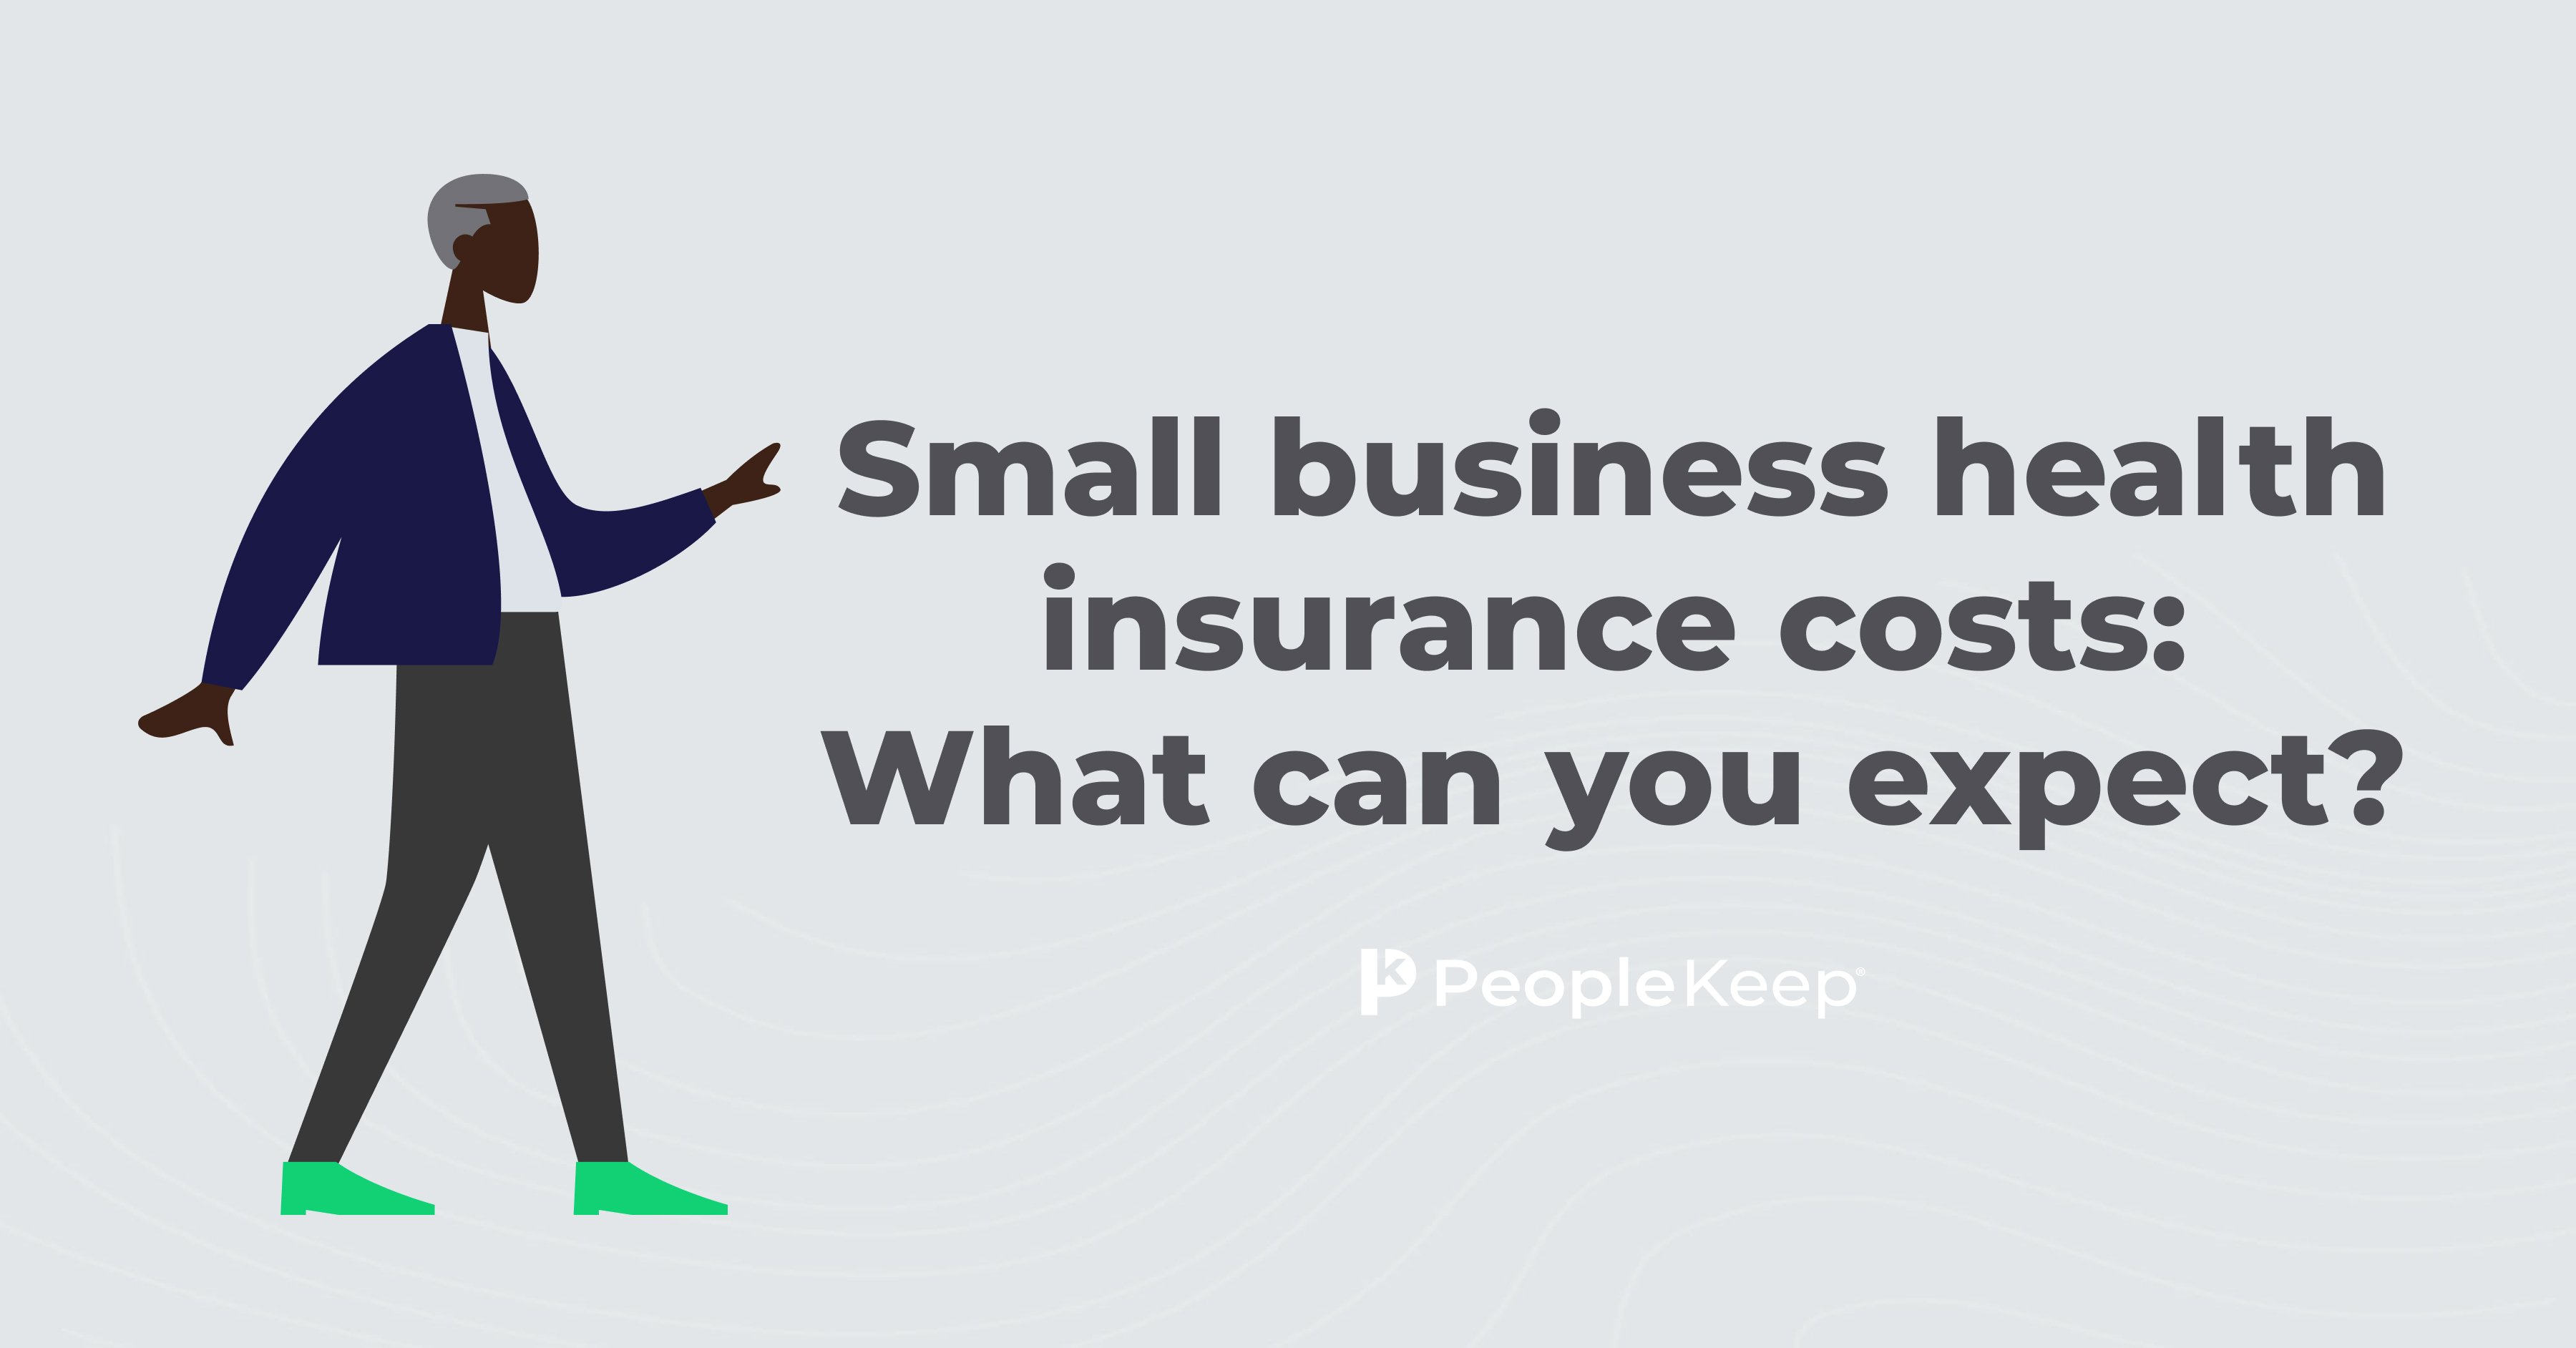 Small business health insurance costs: What can you expect?